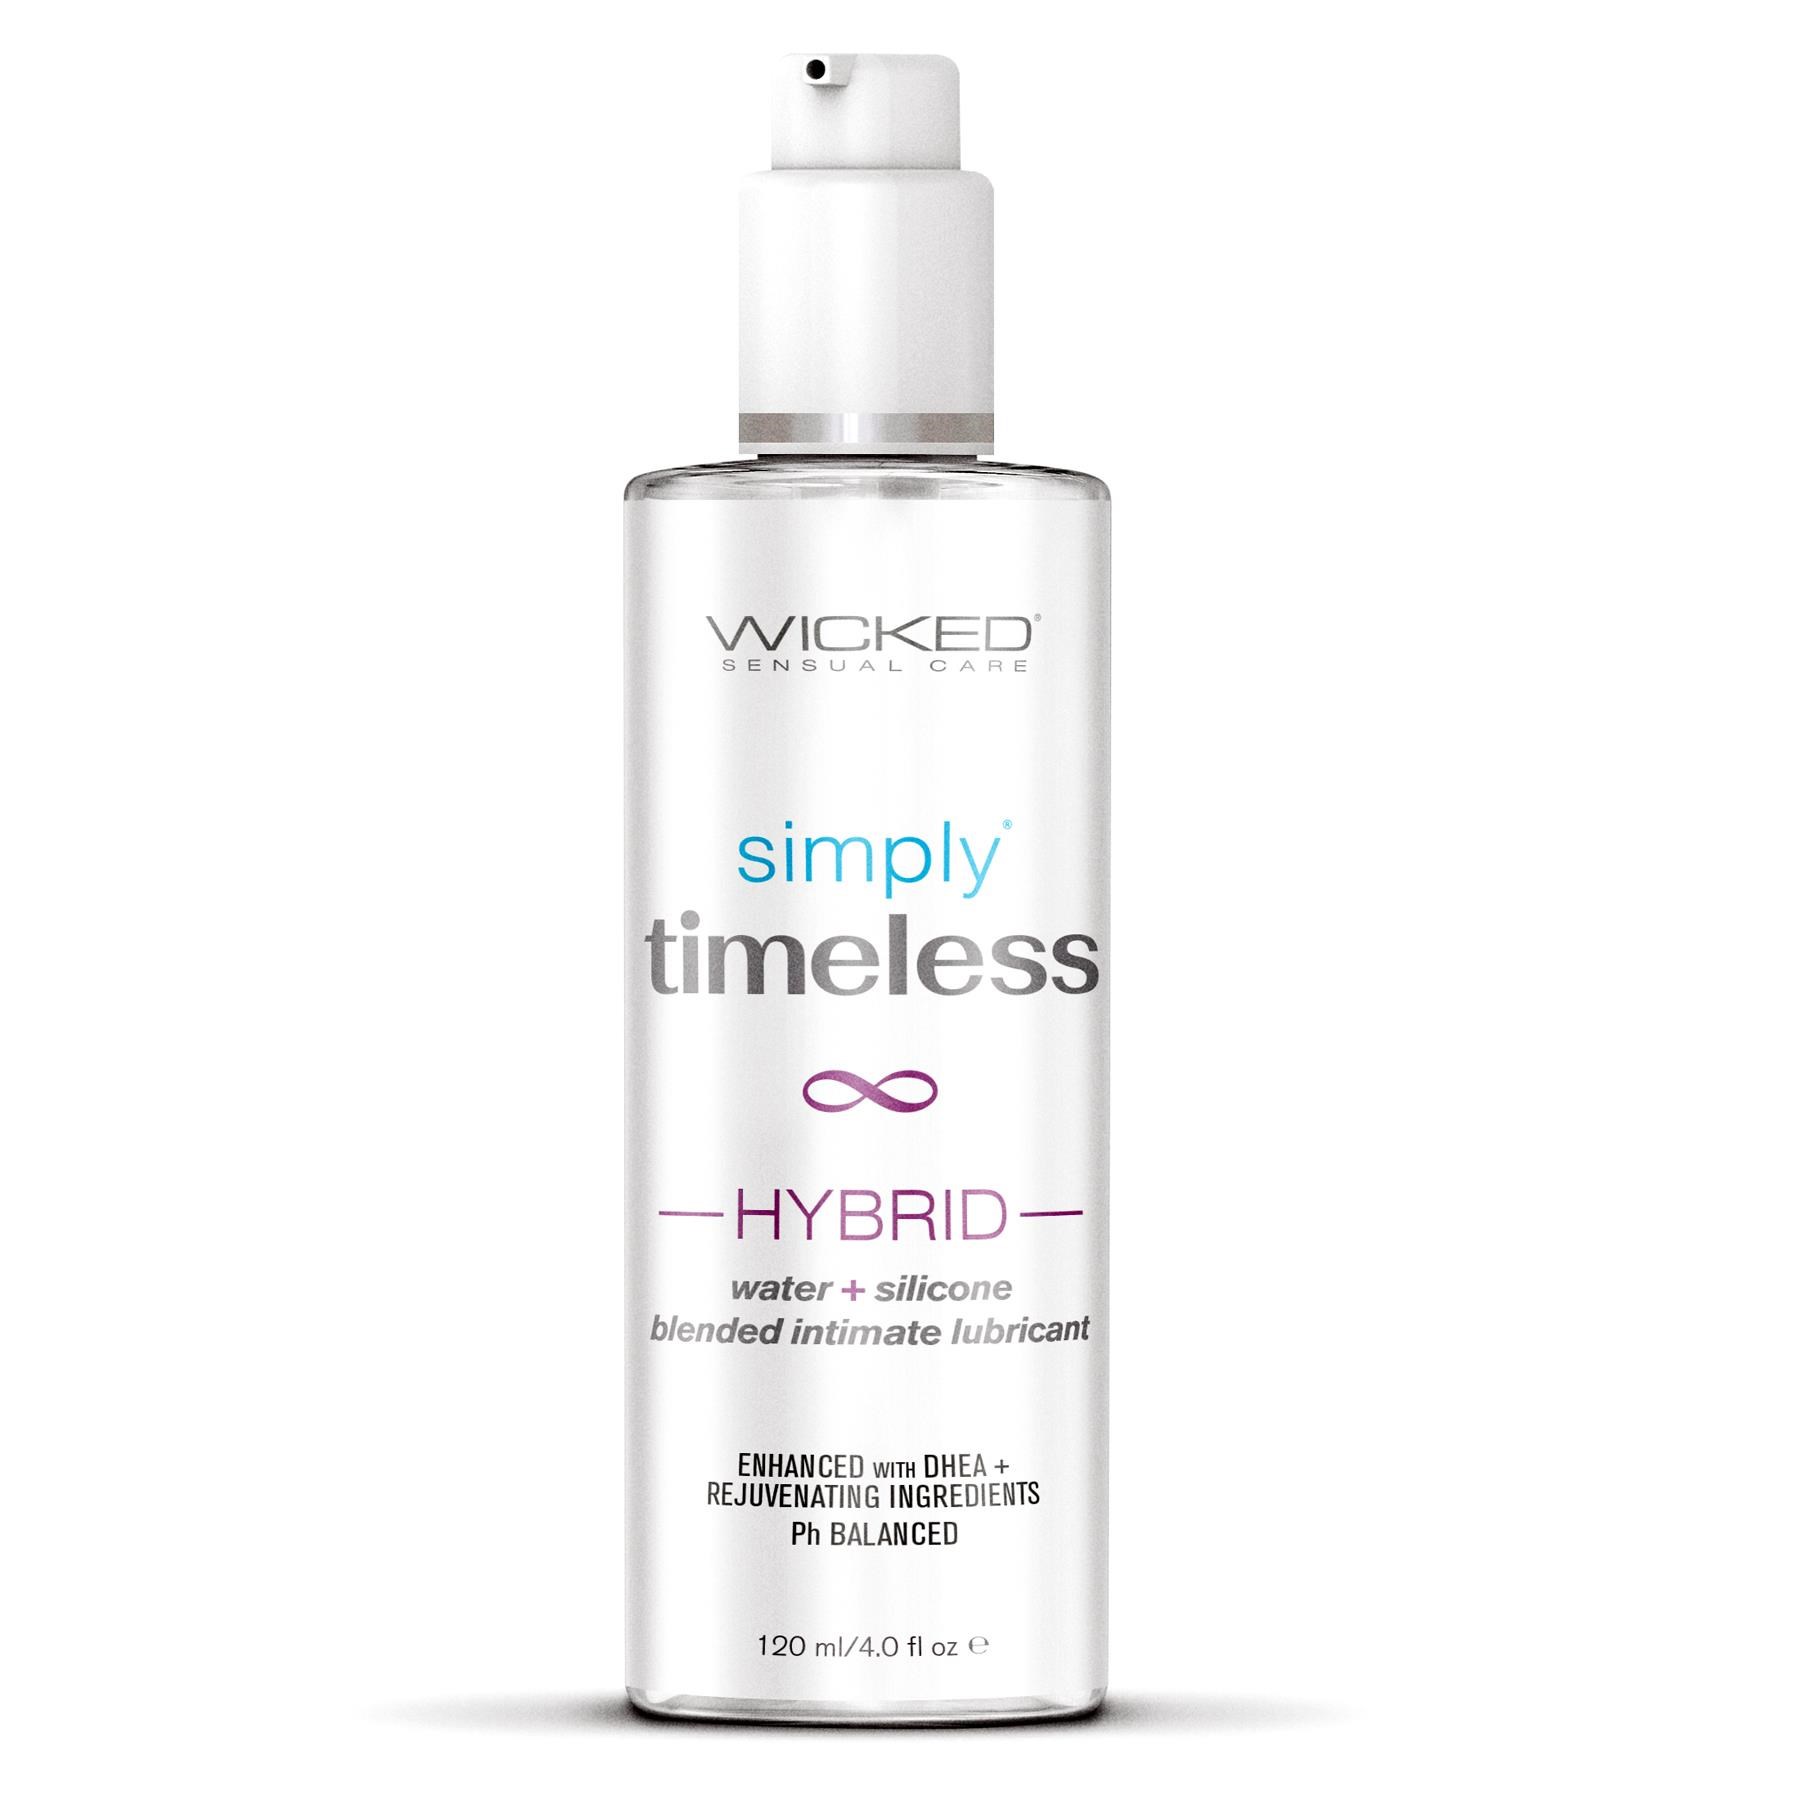 SIMPLY® TIMELESS HYBRID + DHEA front of bottle